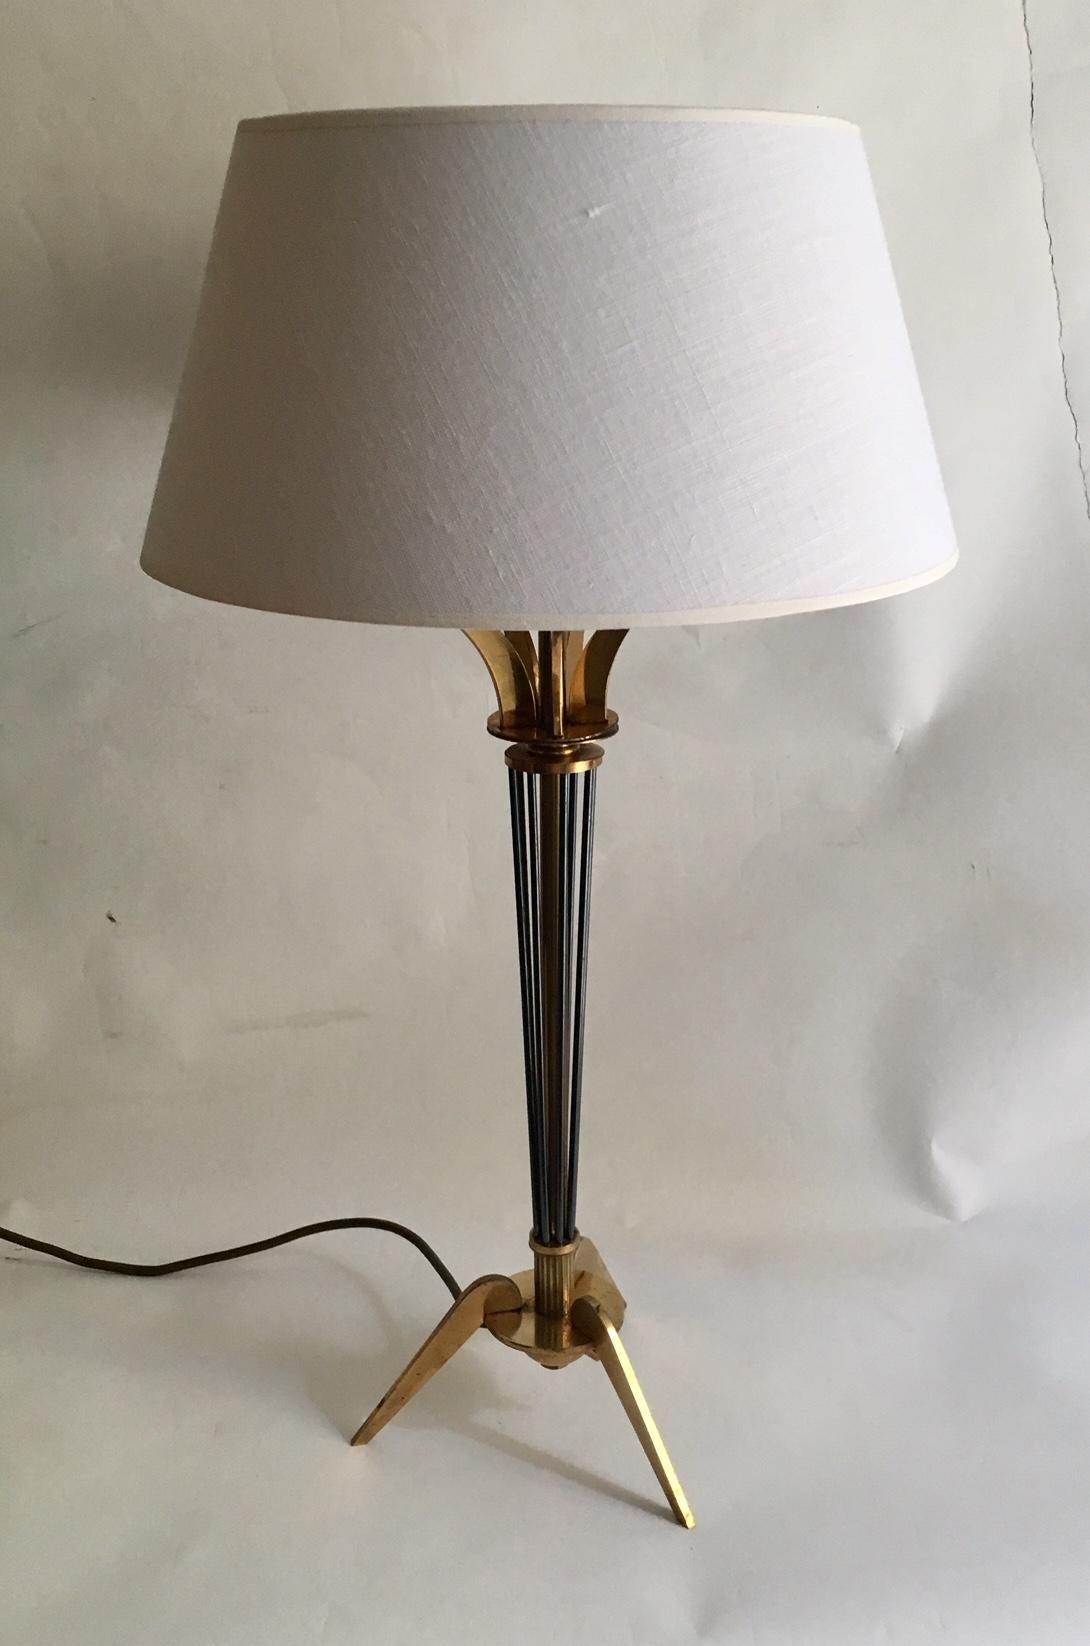 Pair of table lamps by Maison Arlus, gilded brass with conical barrel animated rods with gun barrel patina surmounted by flared blades and terminated by a tripod base. Shades in black and gold interior
From the hotel Claridge near the